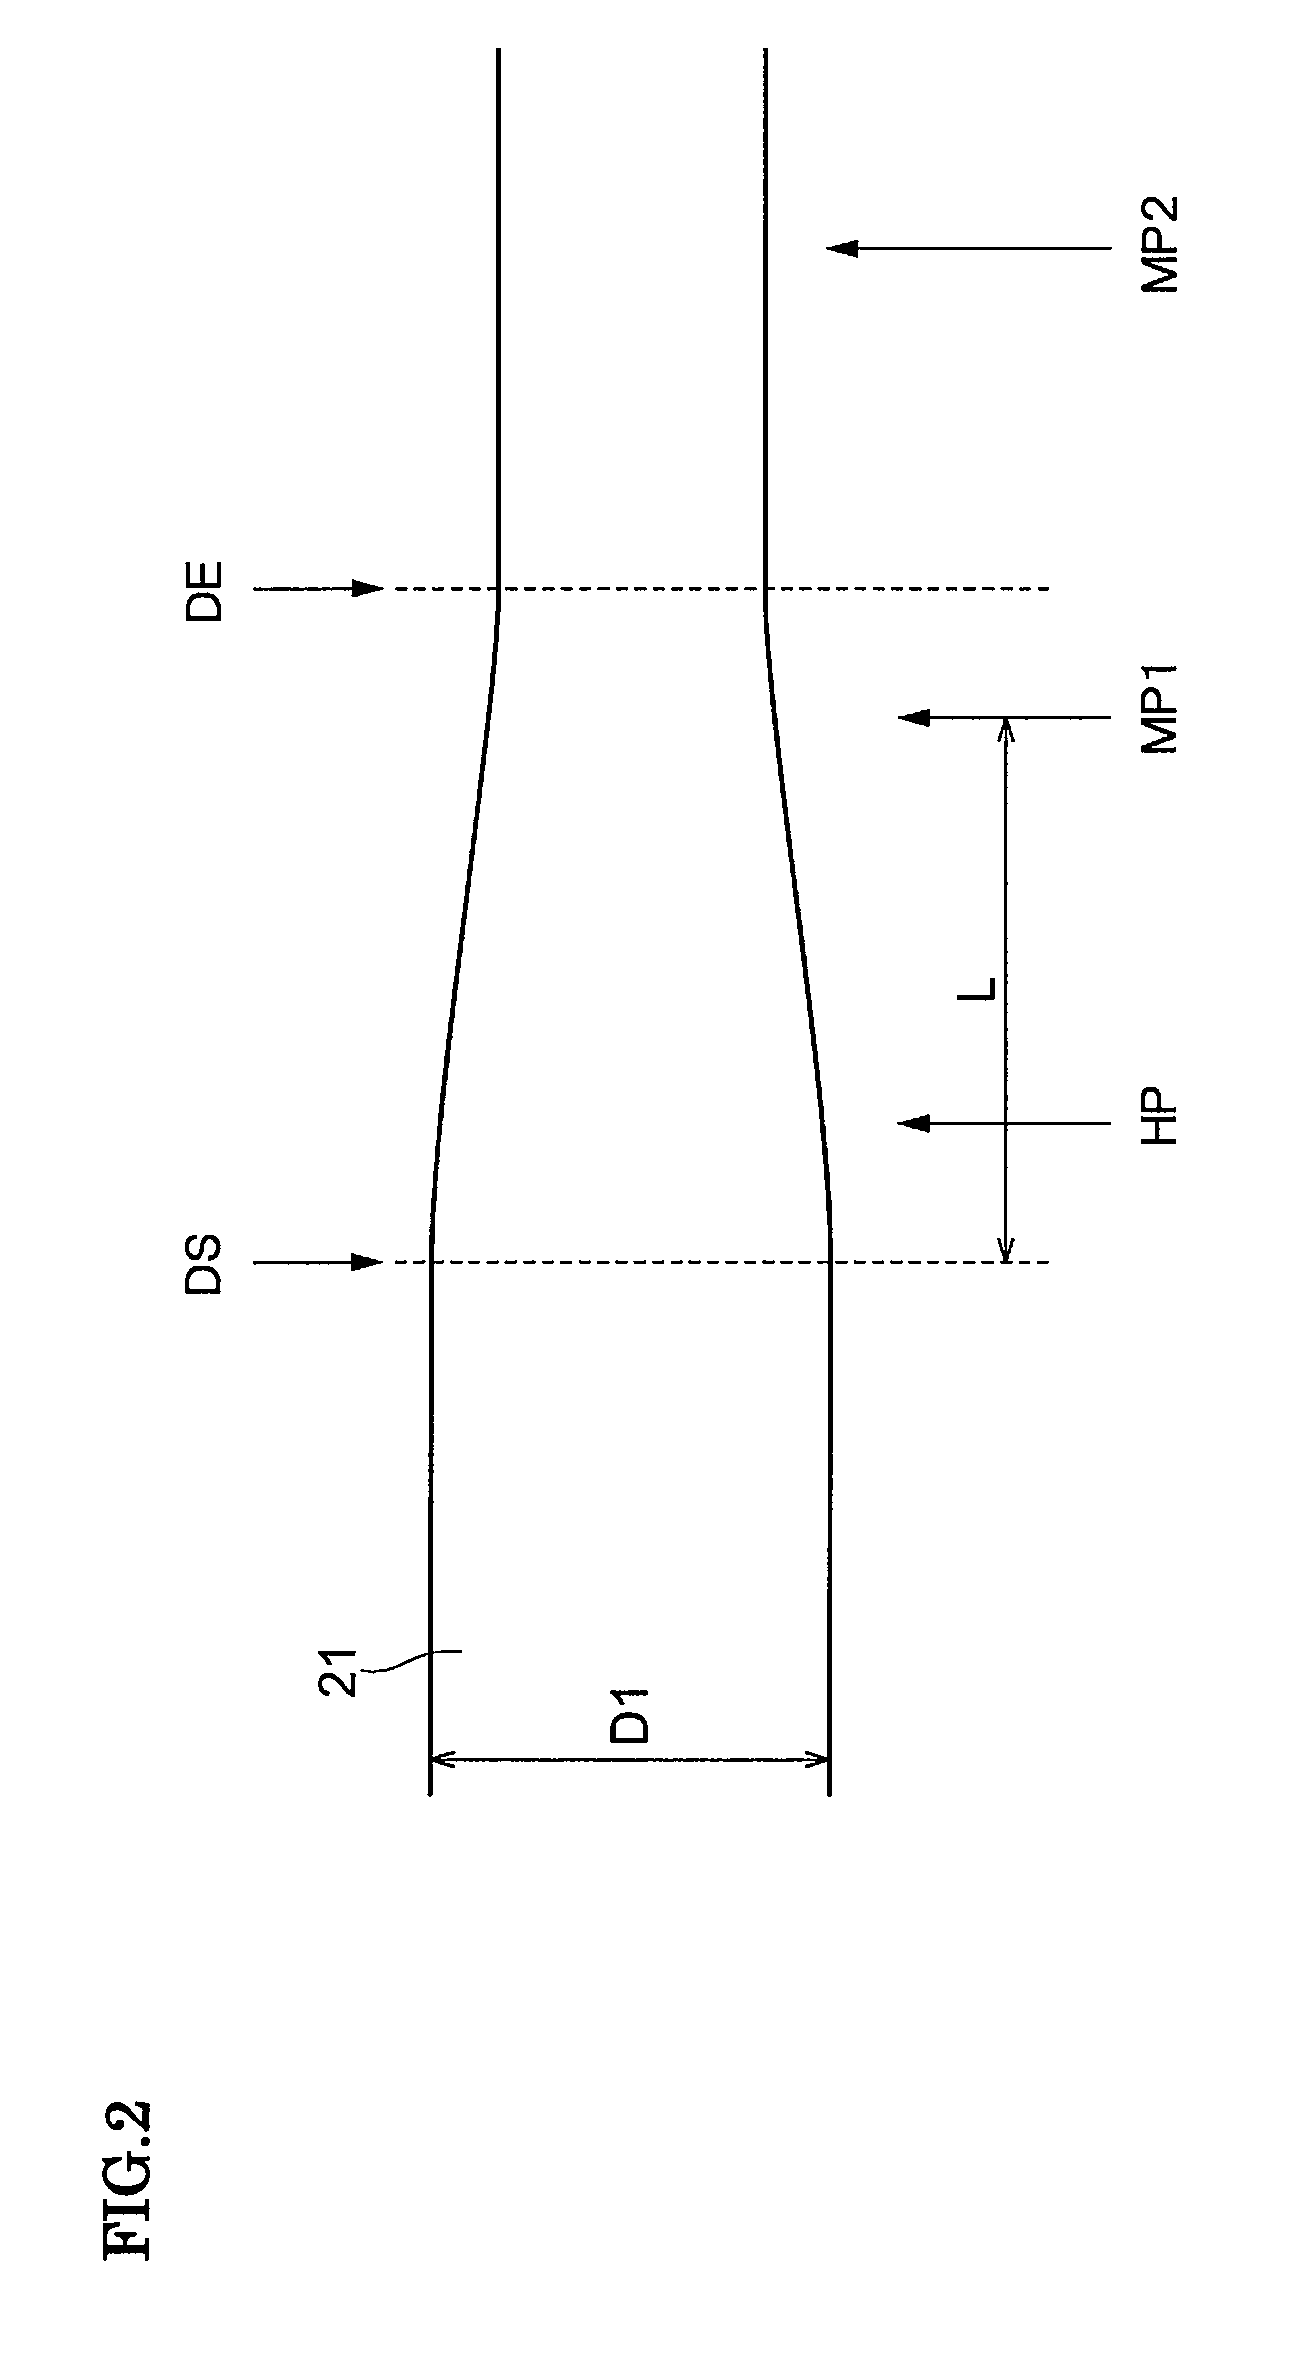 Method of manufacturing an elongated glass body